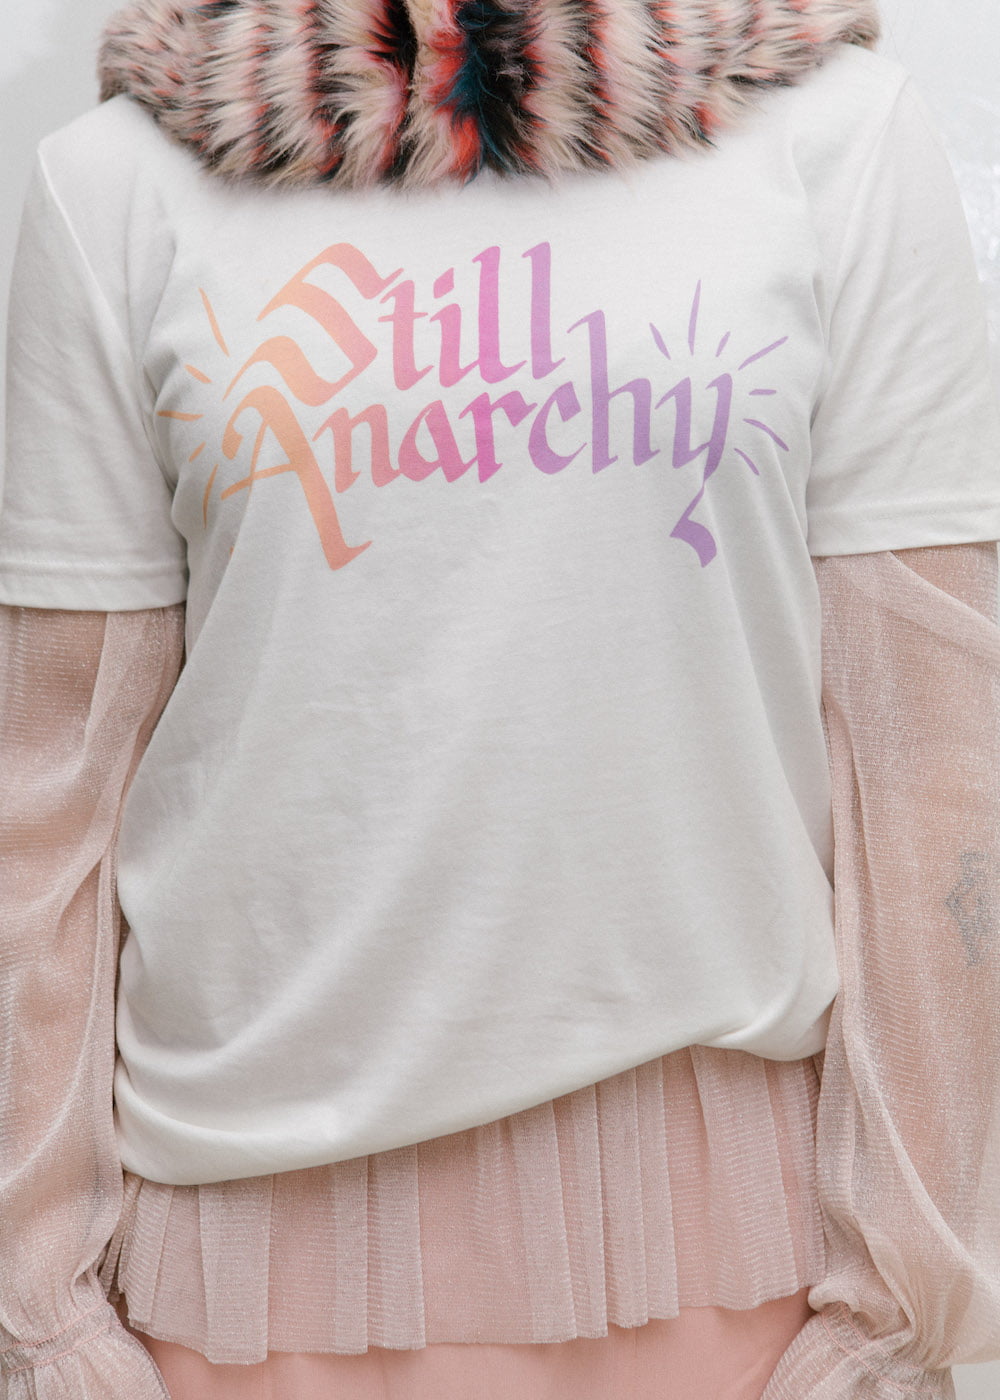 Still Anarchy shirt | Photography by Ellie Ramsden for Freedom Press